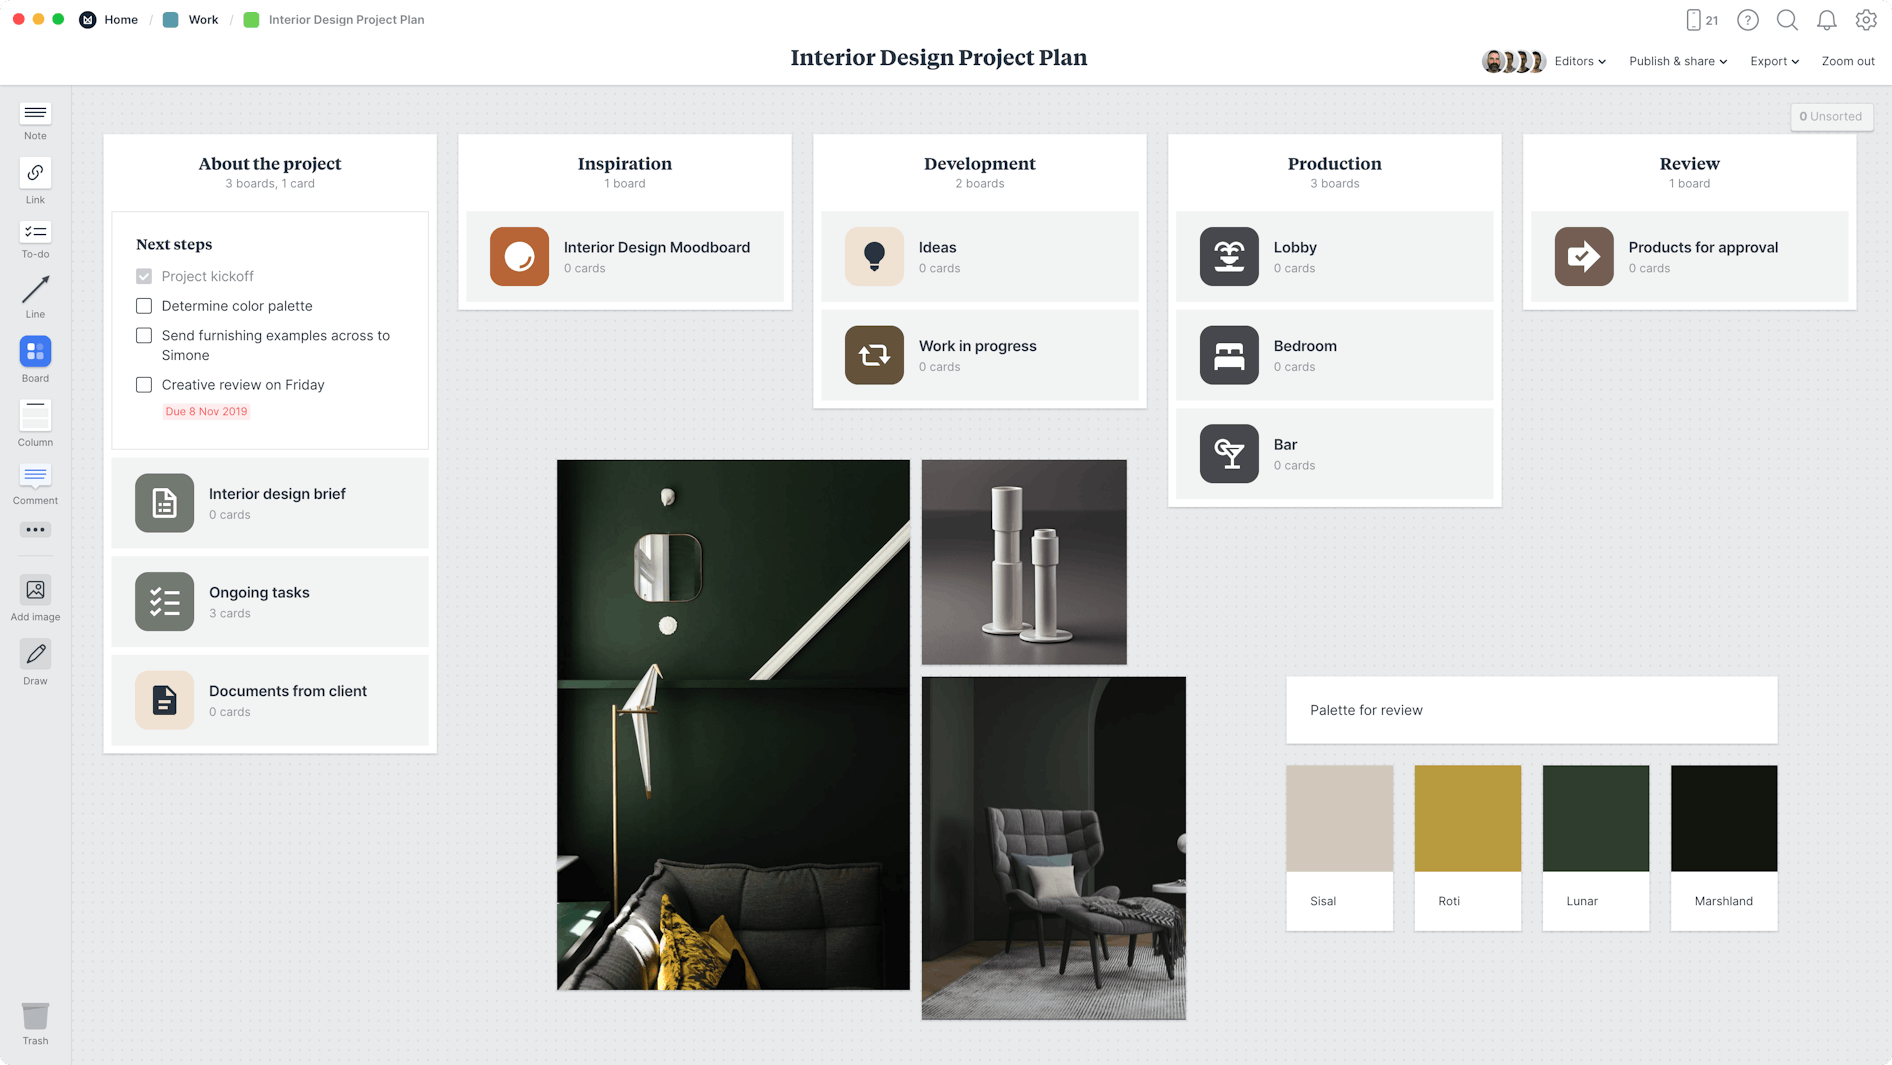 Interior Design Project Plan Template, within the Milanote app